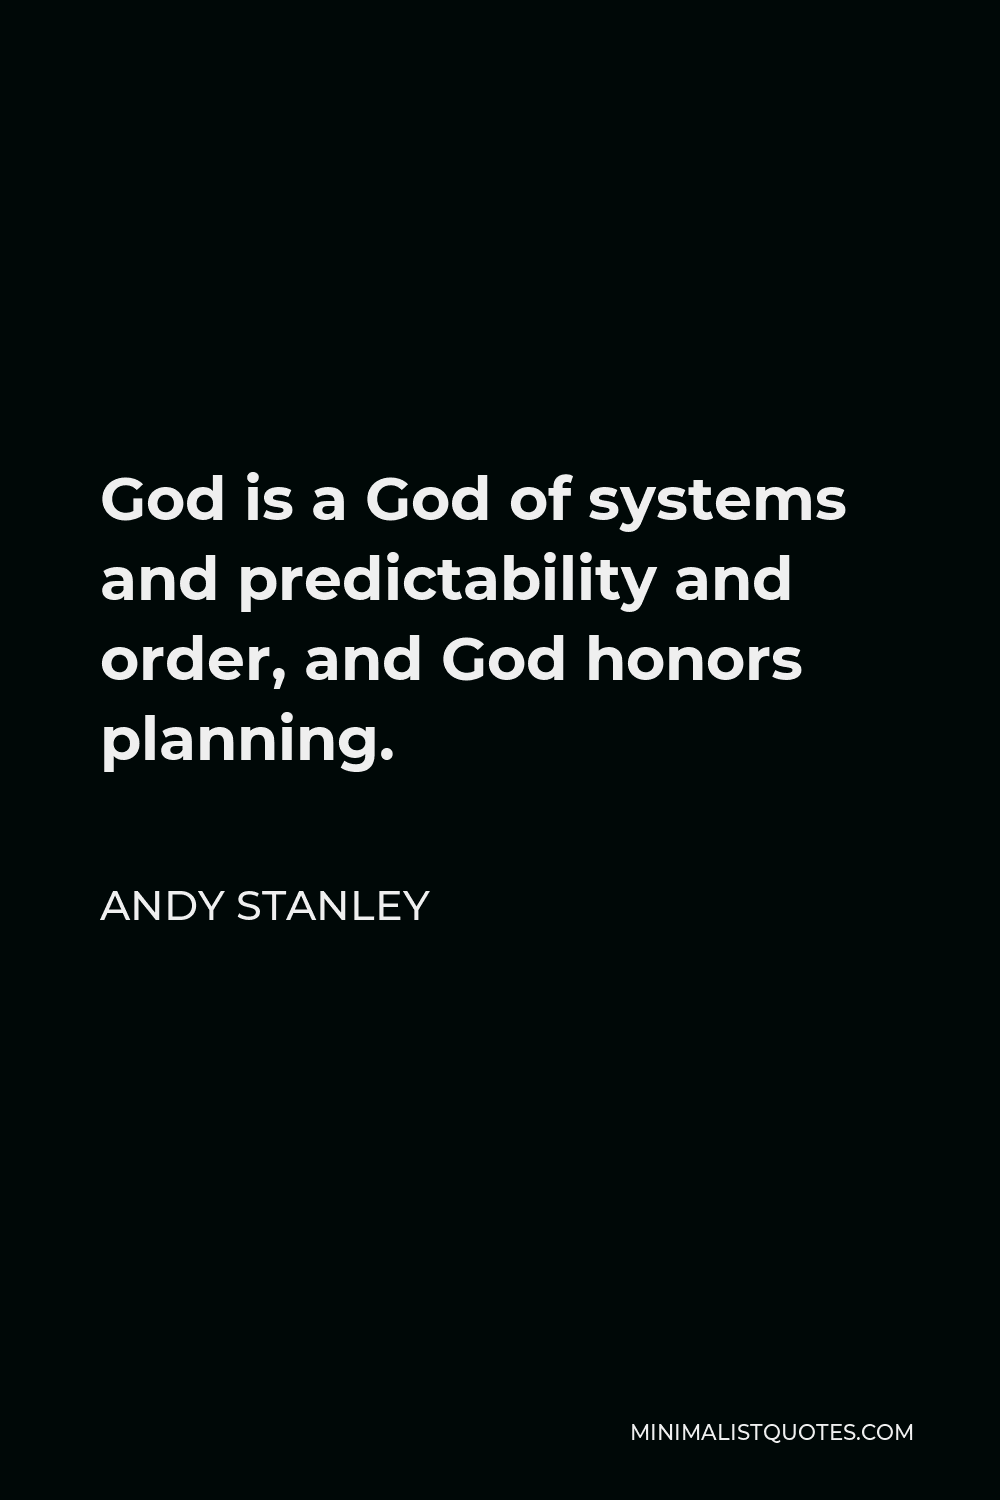 Andy Stanley Quote - God is a God of systems and predictability and order, and God honors planning.